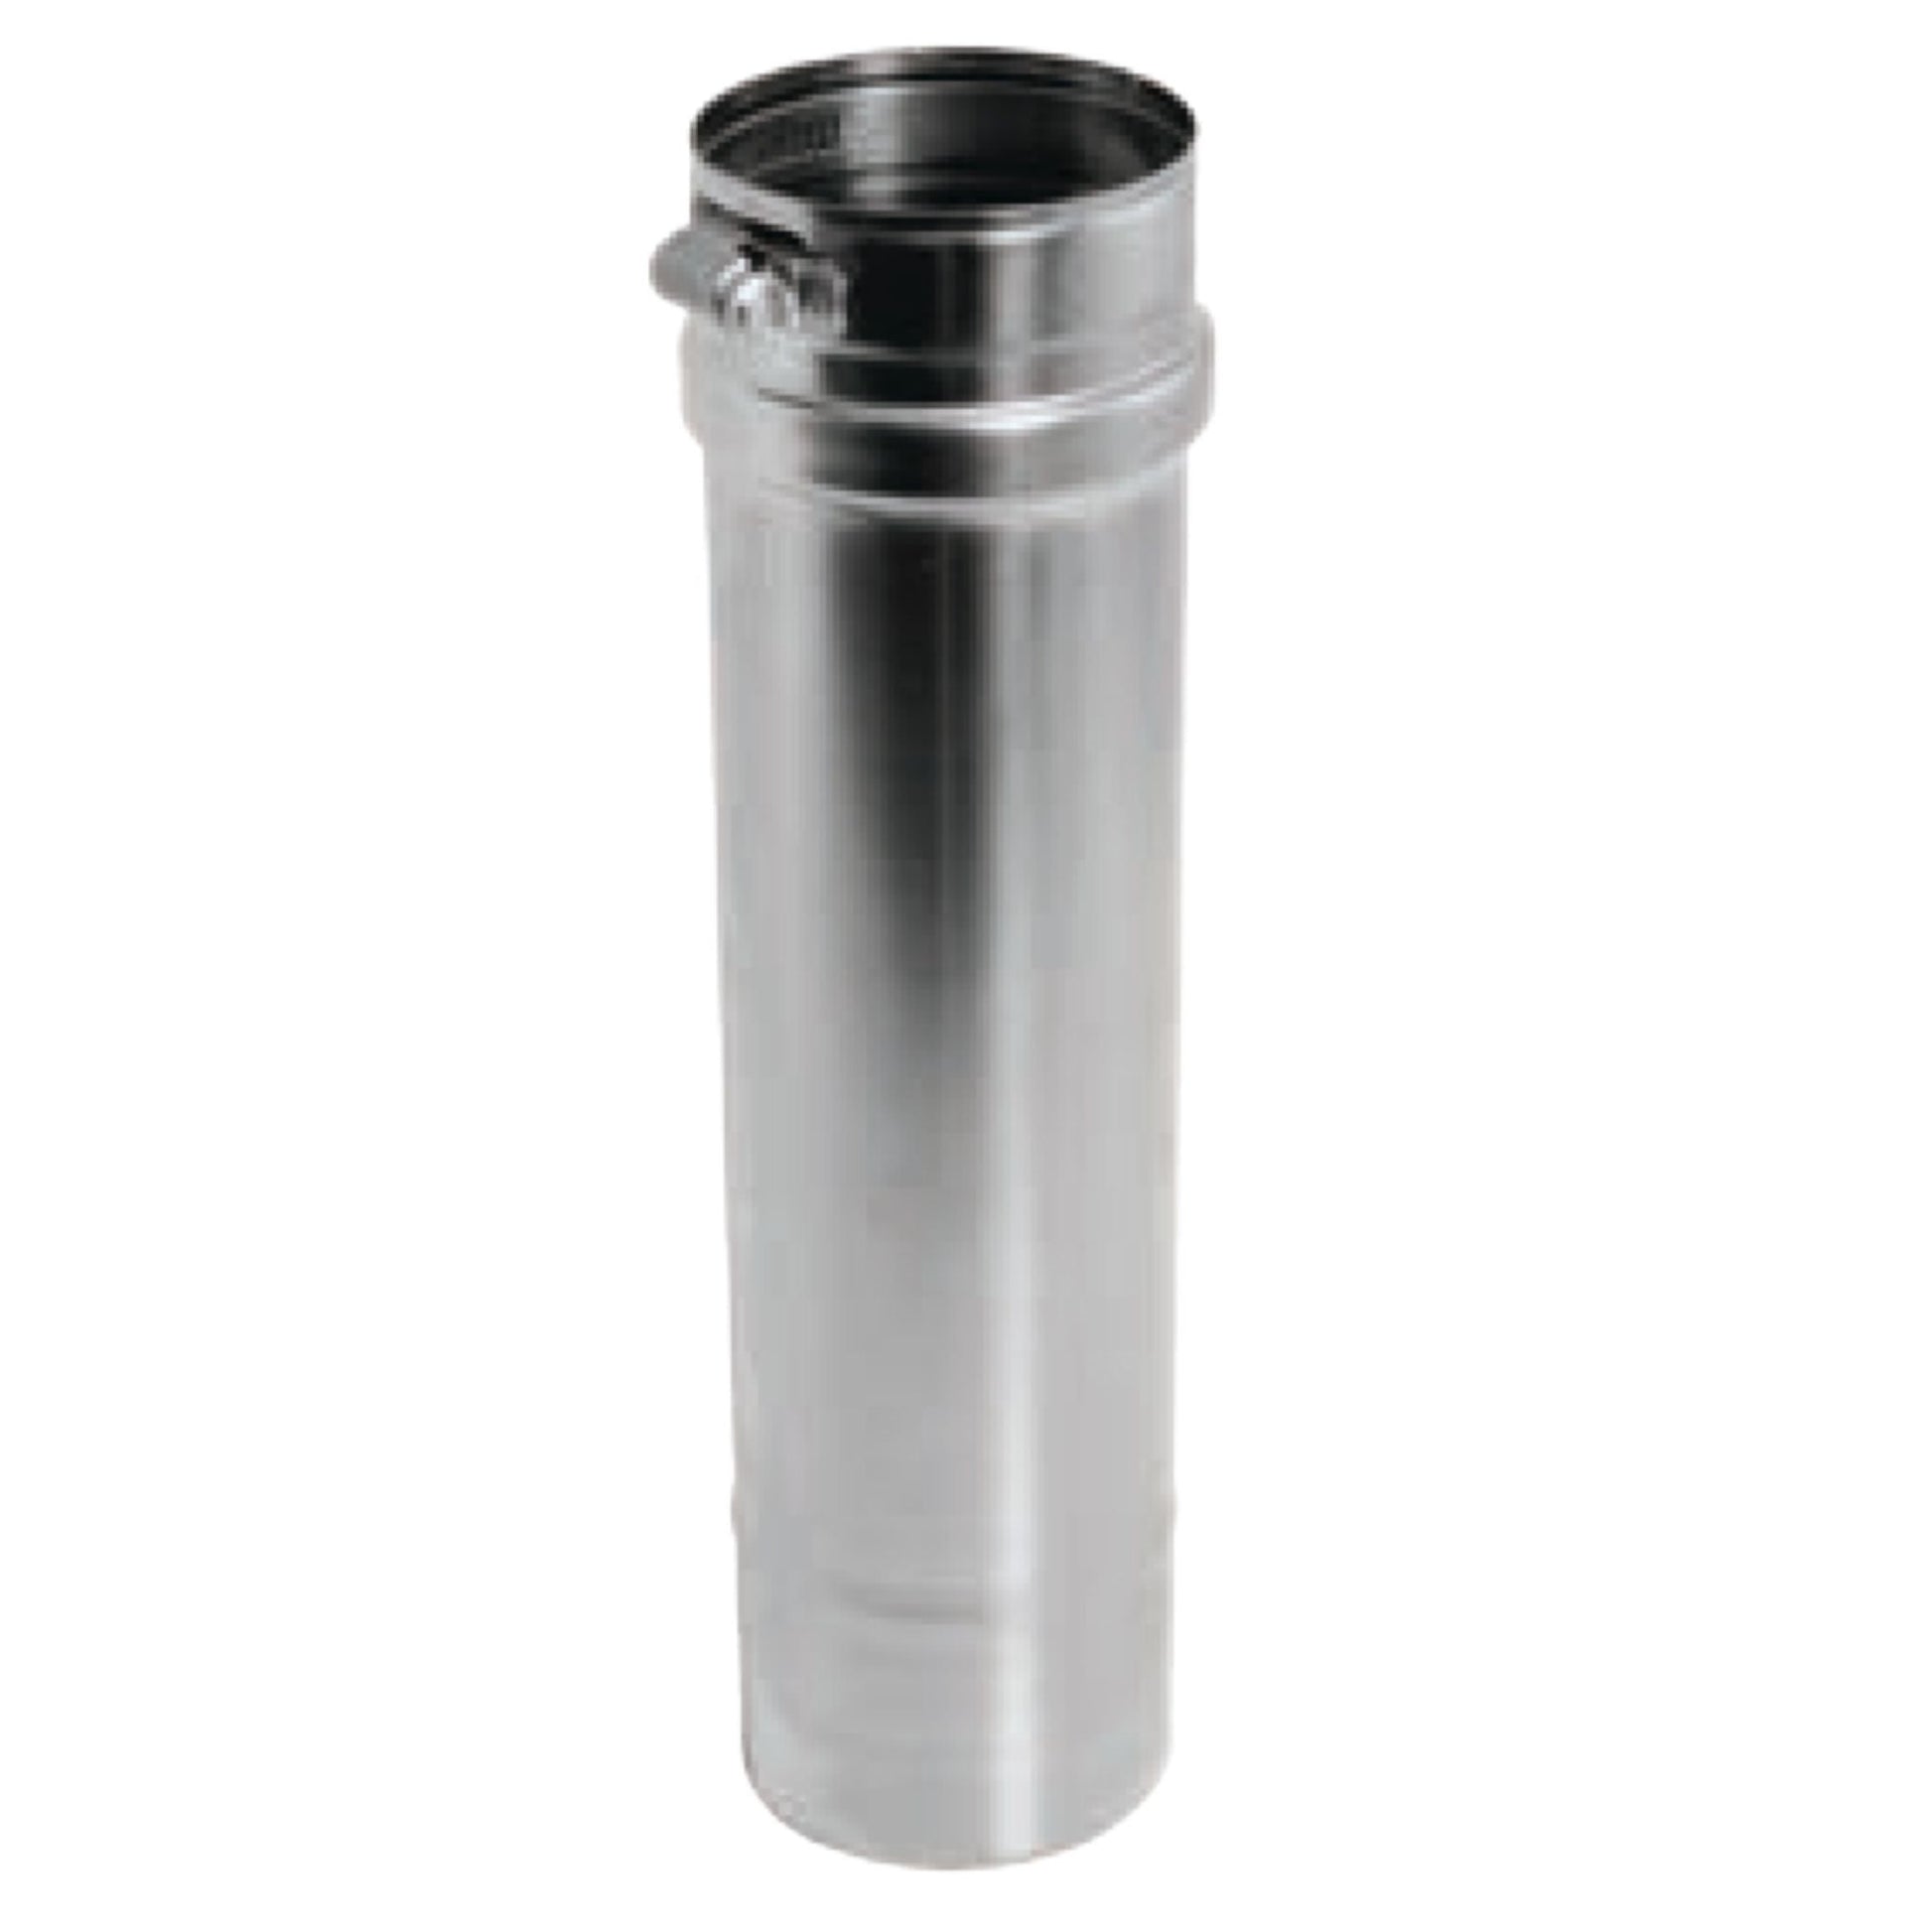 DuraVent FasNSeal 5" x 36" 29-4C Stainless Steel Vent Length